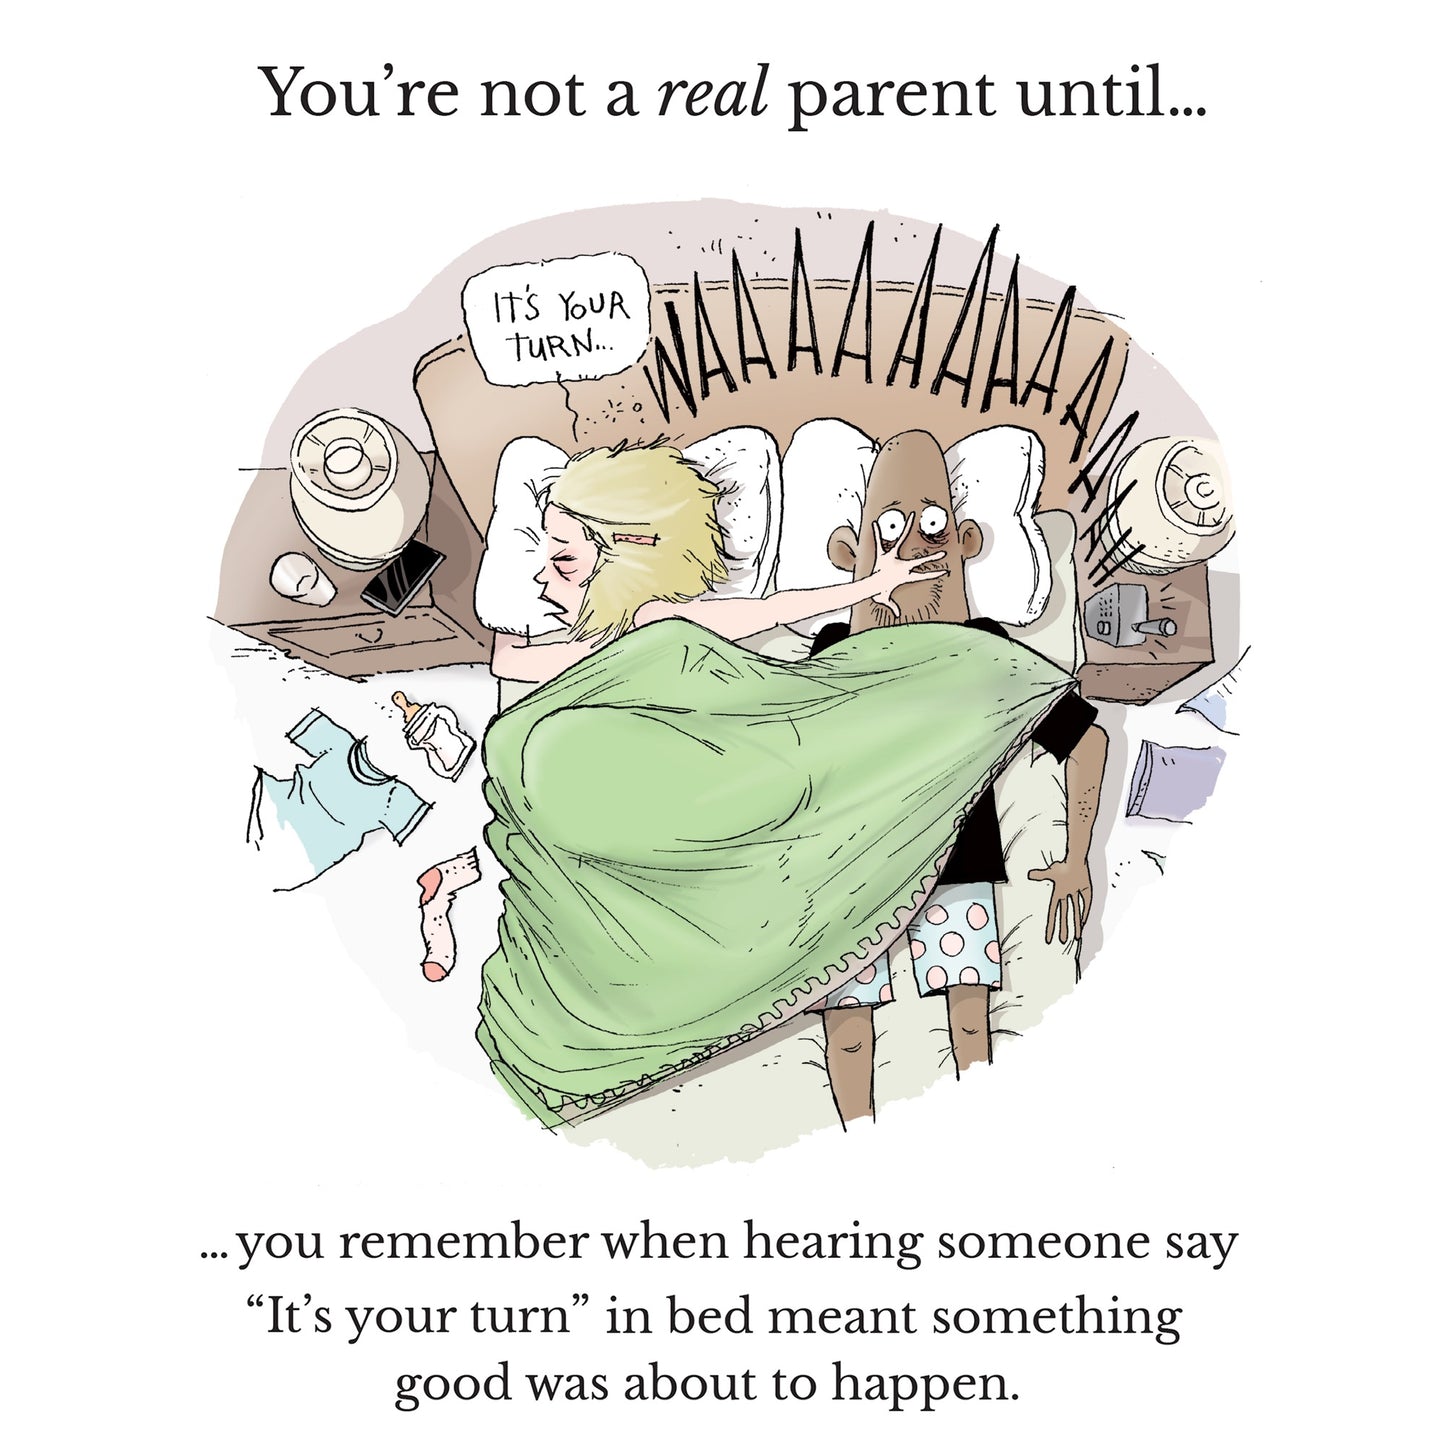 Hardcover Book: You're Not A Real Parent Until...